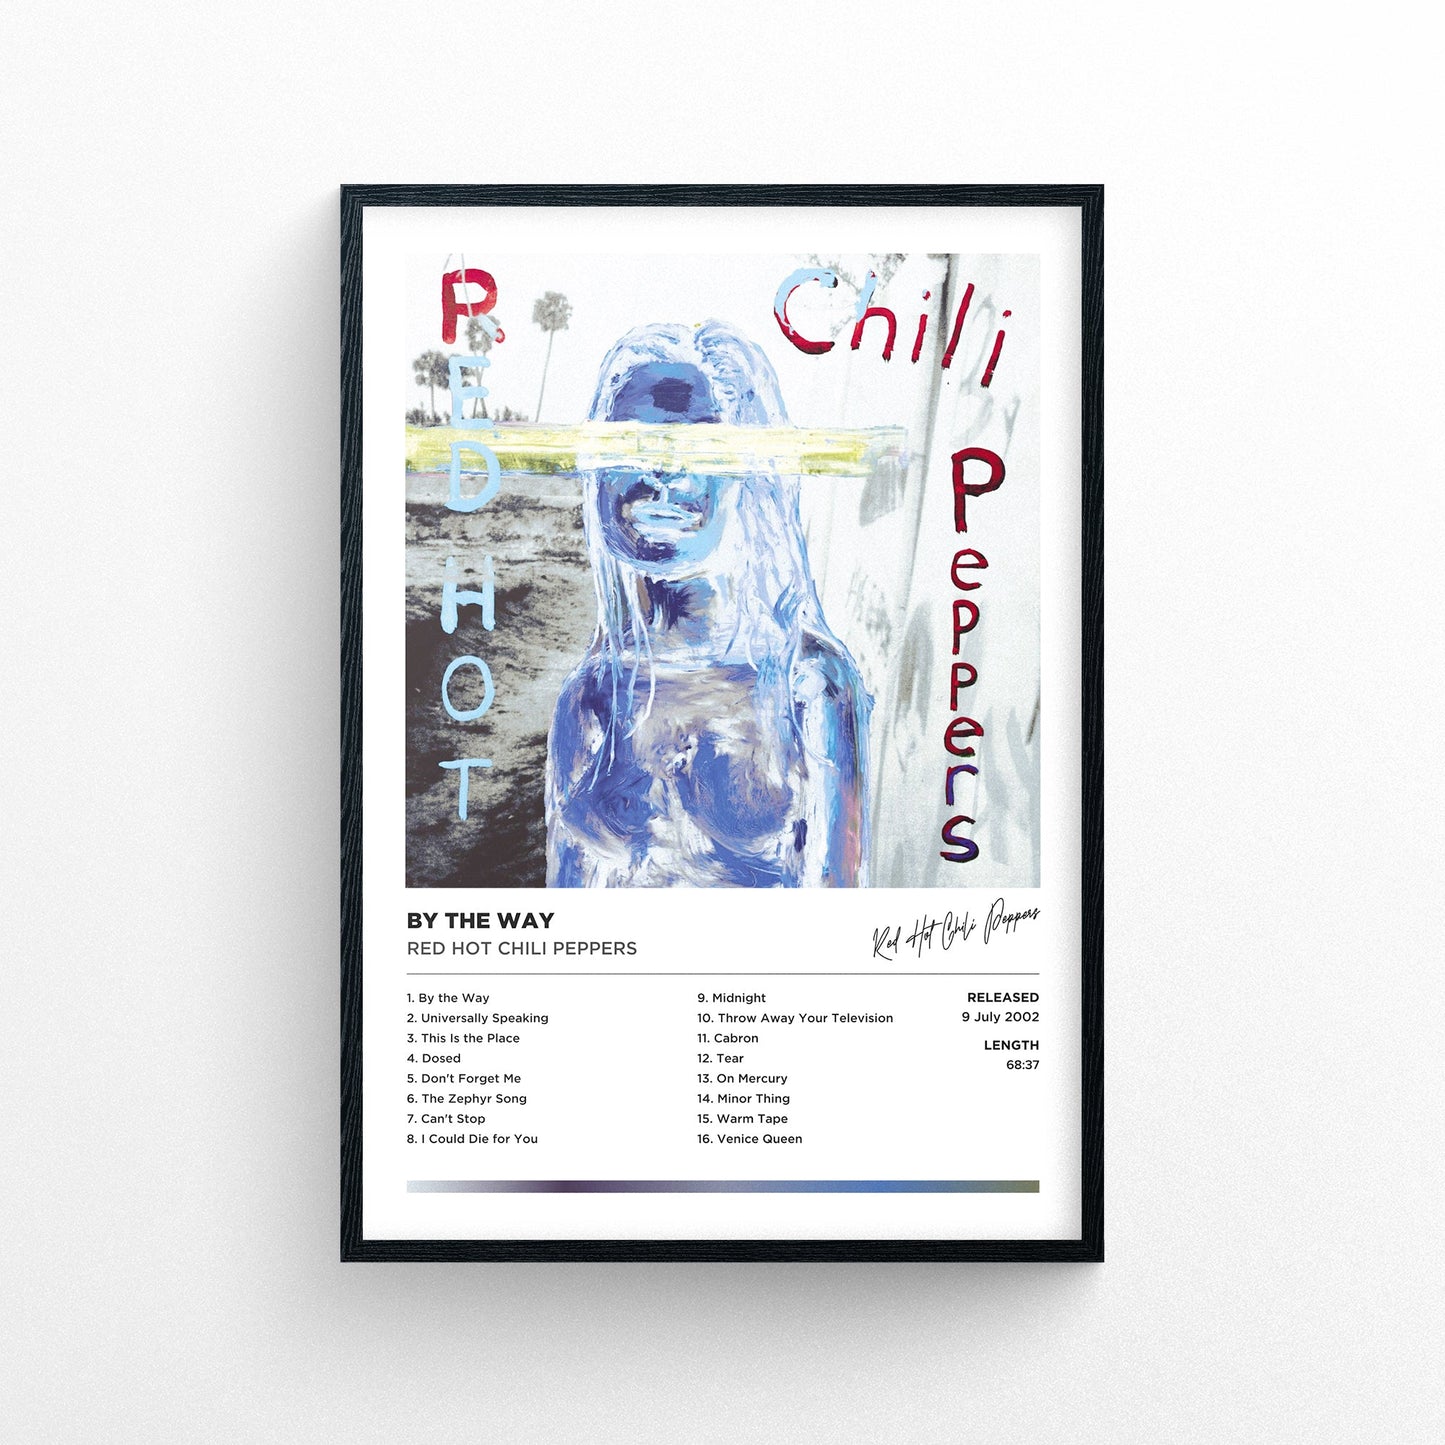 Red Hot Chili Peppers - By the Way Framed Poster Print | Polaroid Style | Album Cover Artwork